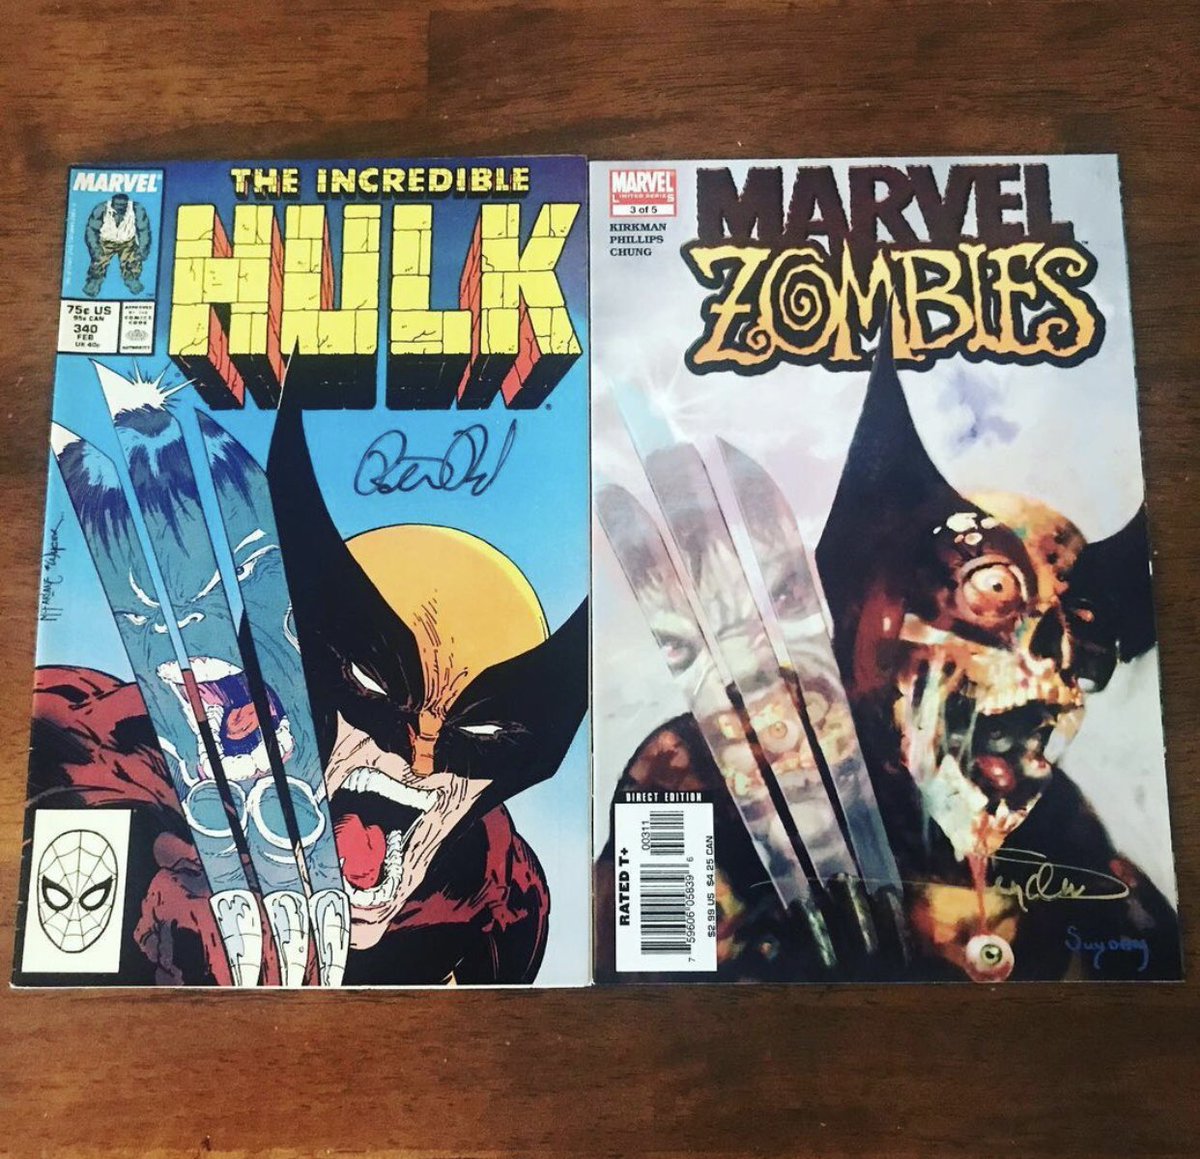 HORROR COMICS! Marvel Zombies issue 3, signed by Arthur Suydam, tribute to The Incredible Hulk issue 181, signed by Peter David. #horrorcomics #marvelzombies #wolverine #theincrediblehulk #marvelcomics #bookclubmembercomics #signedcomics #peterdavid #toddmcfarlane #arthursuydam